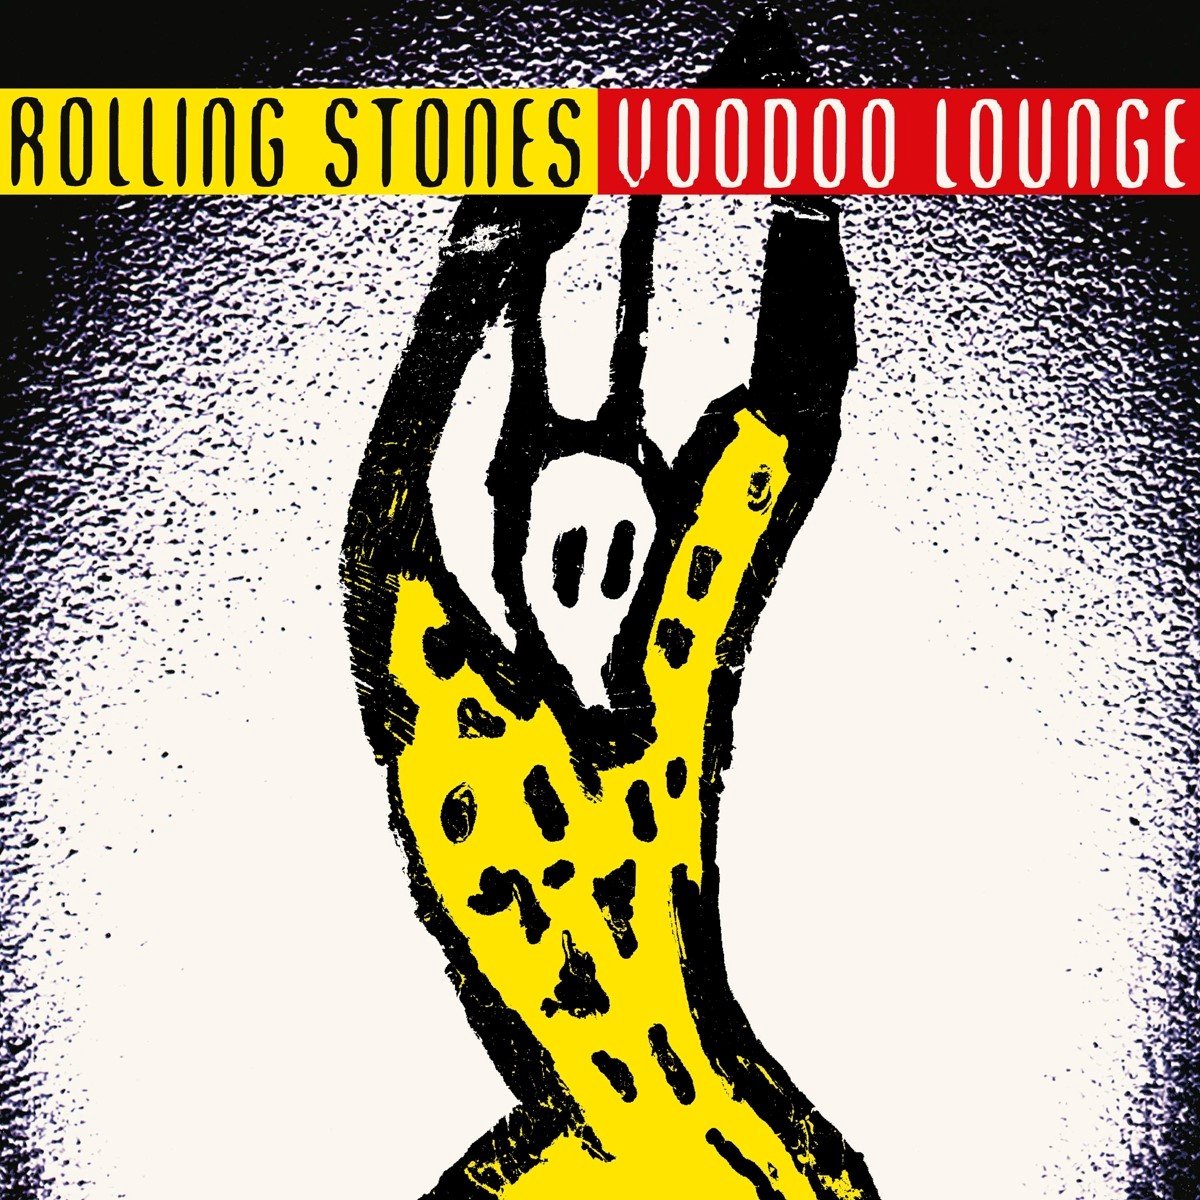 The Rolling Stones - Voodoo Lounge (2 LP) (Half Speed) (Remastered 2009) - The Rolling Stones